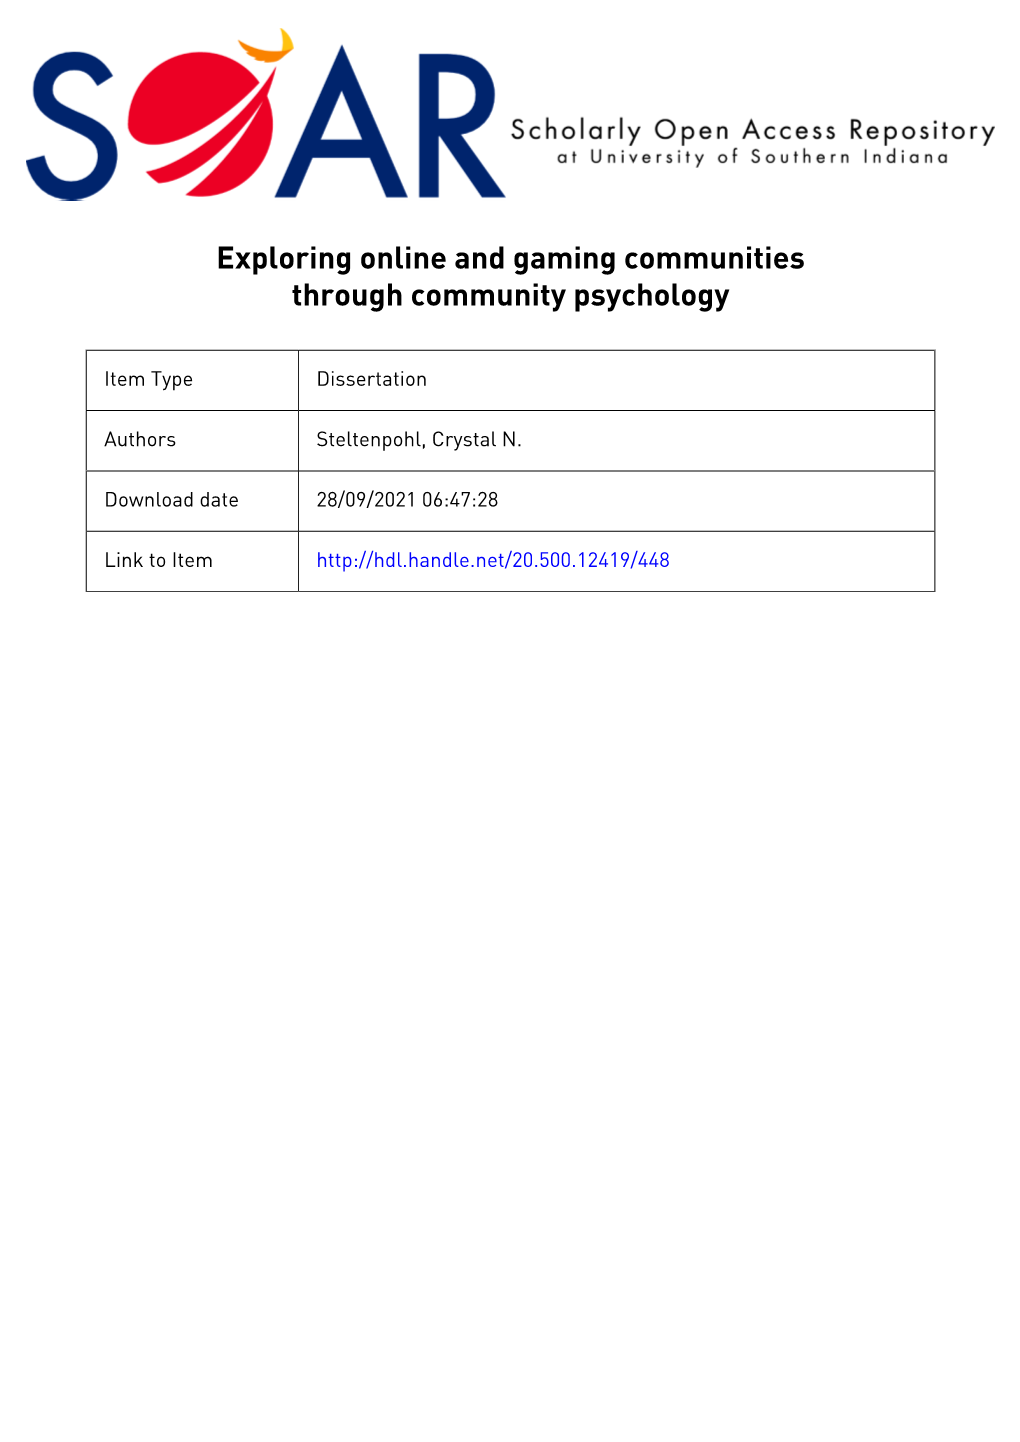 Exploring Online and Gaming Communities Through Community Psychology